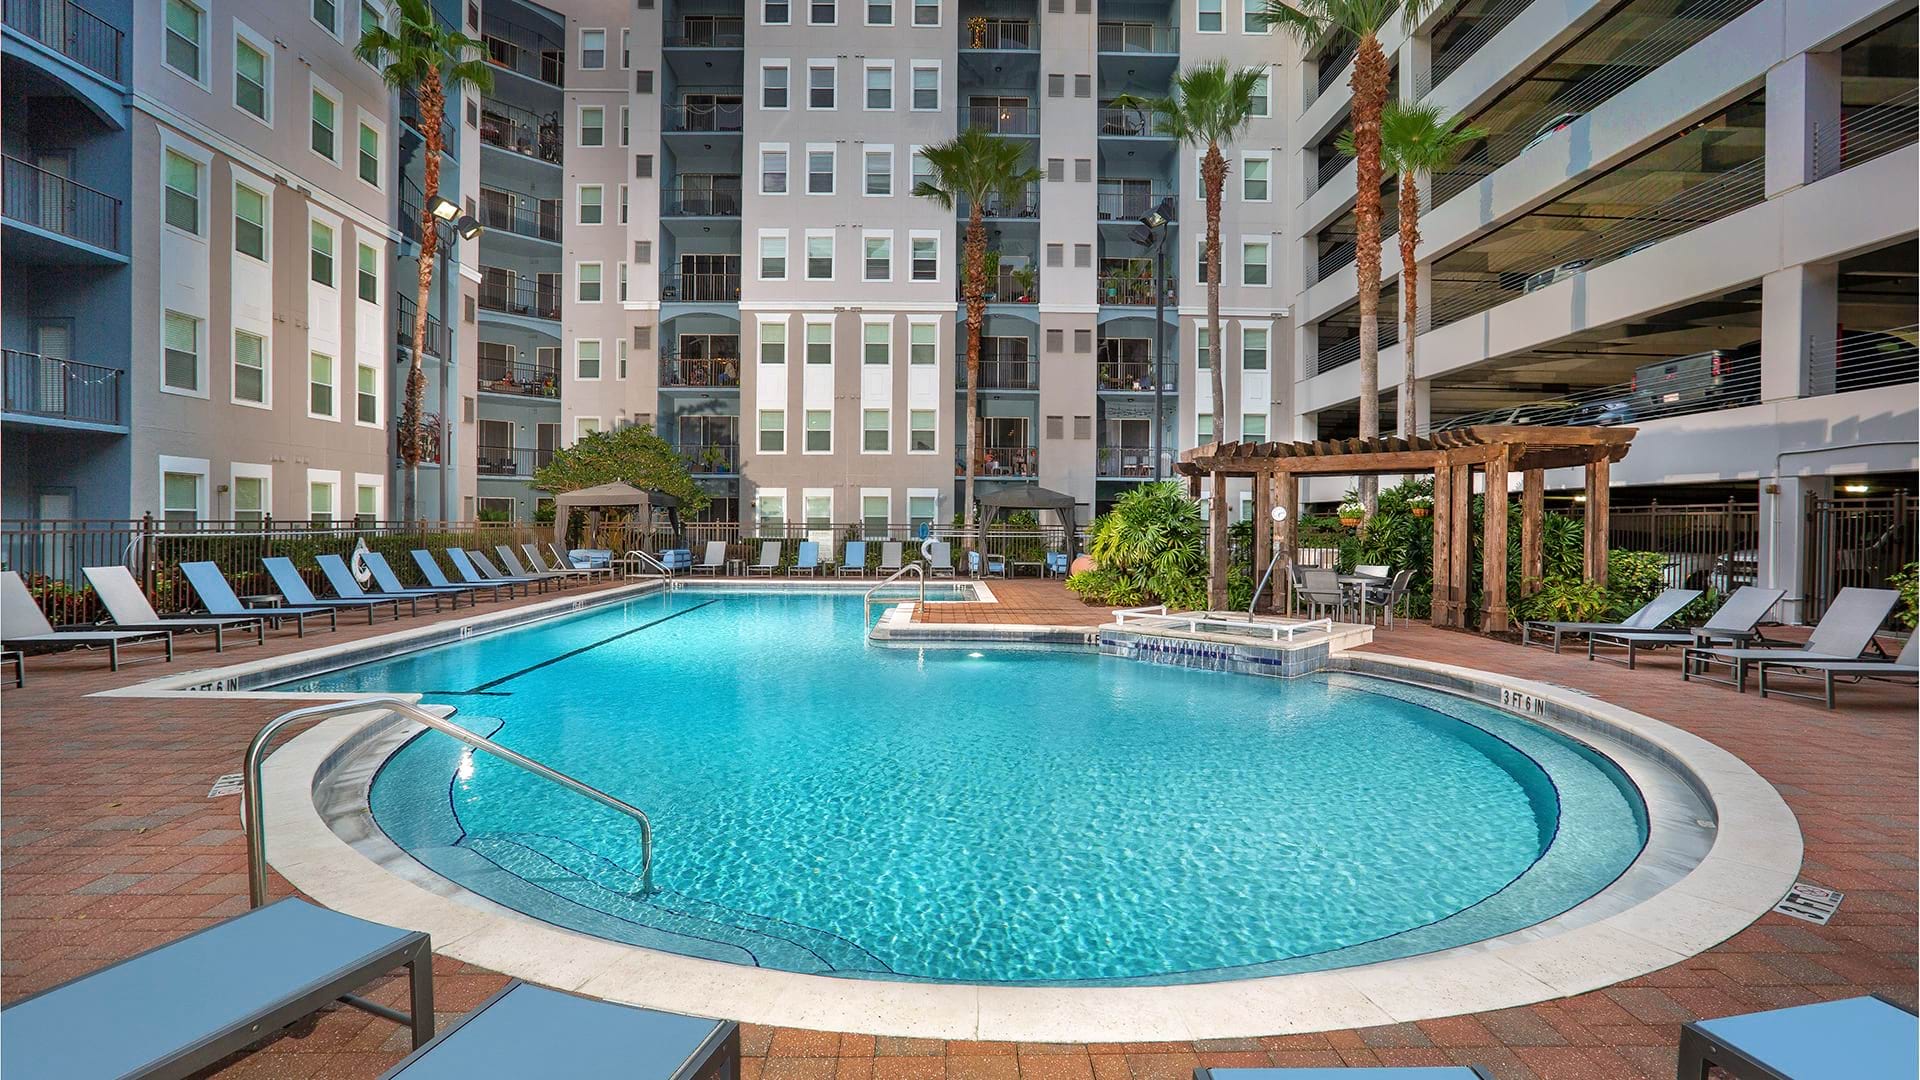 Resort-Style Pool with Lounge Chairs at Our Apartments for Rent in Altamonte Springs, FL